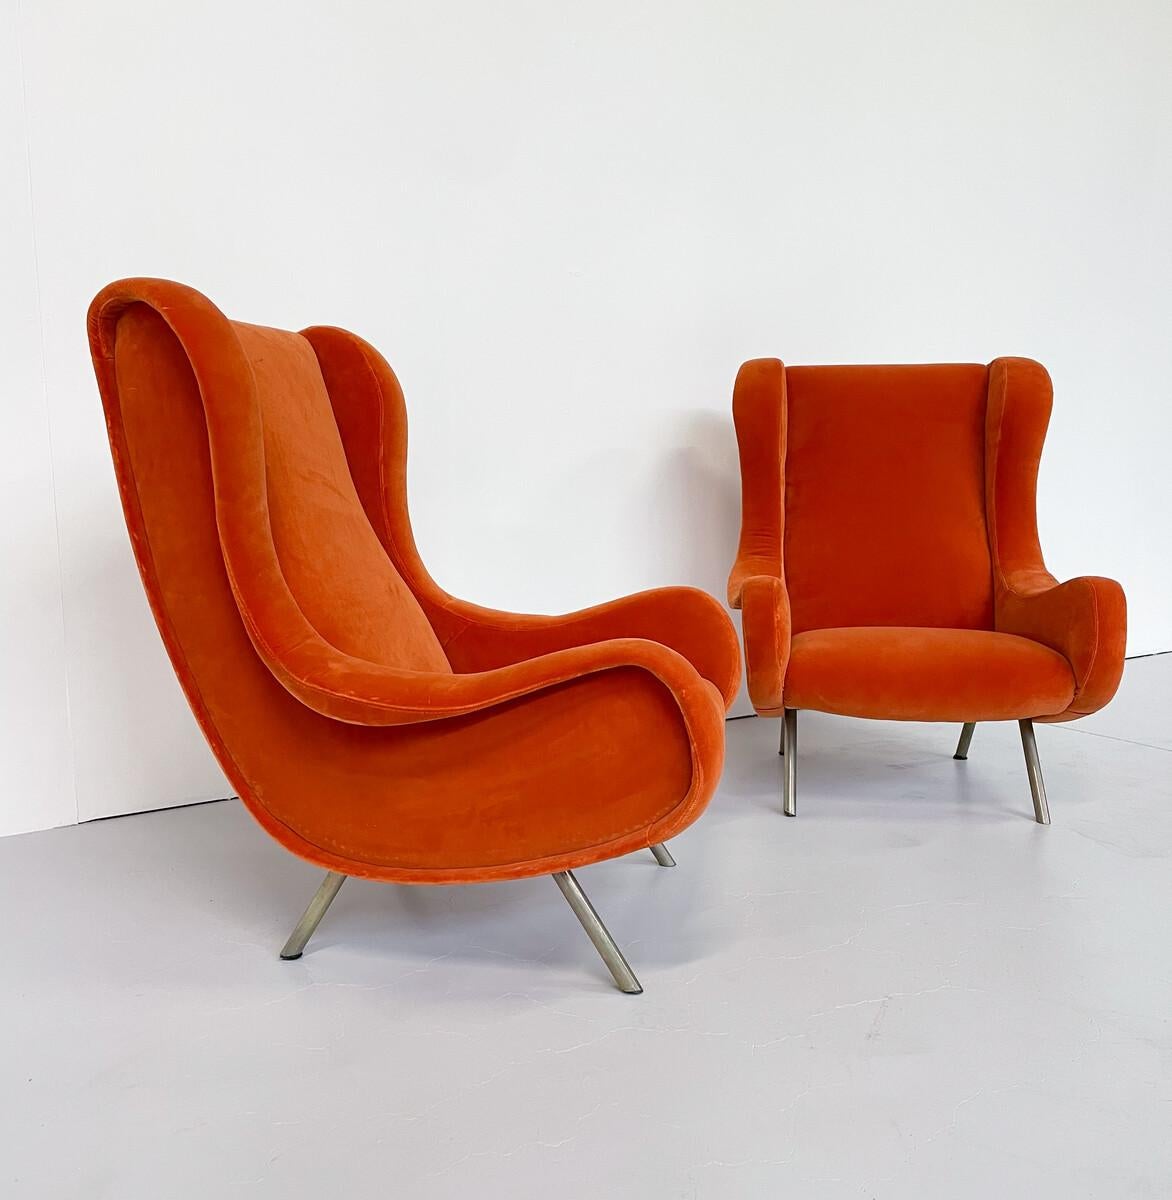 Mid-20th Century Mid-Century Modern Pair of Senior Armchairs by Marco Zanuso for Arlfex For Sale